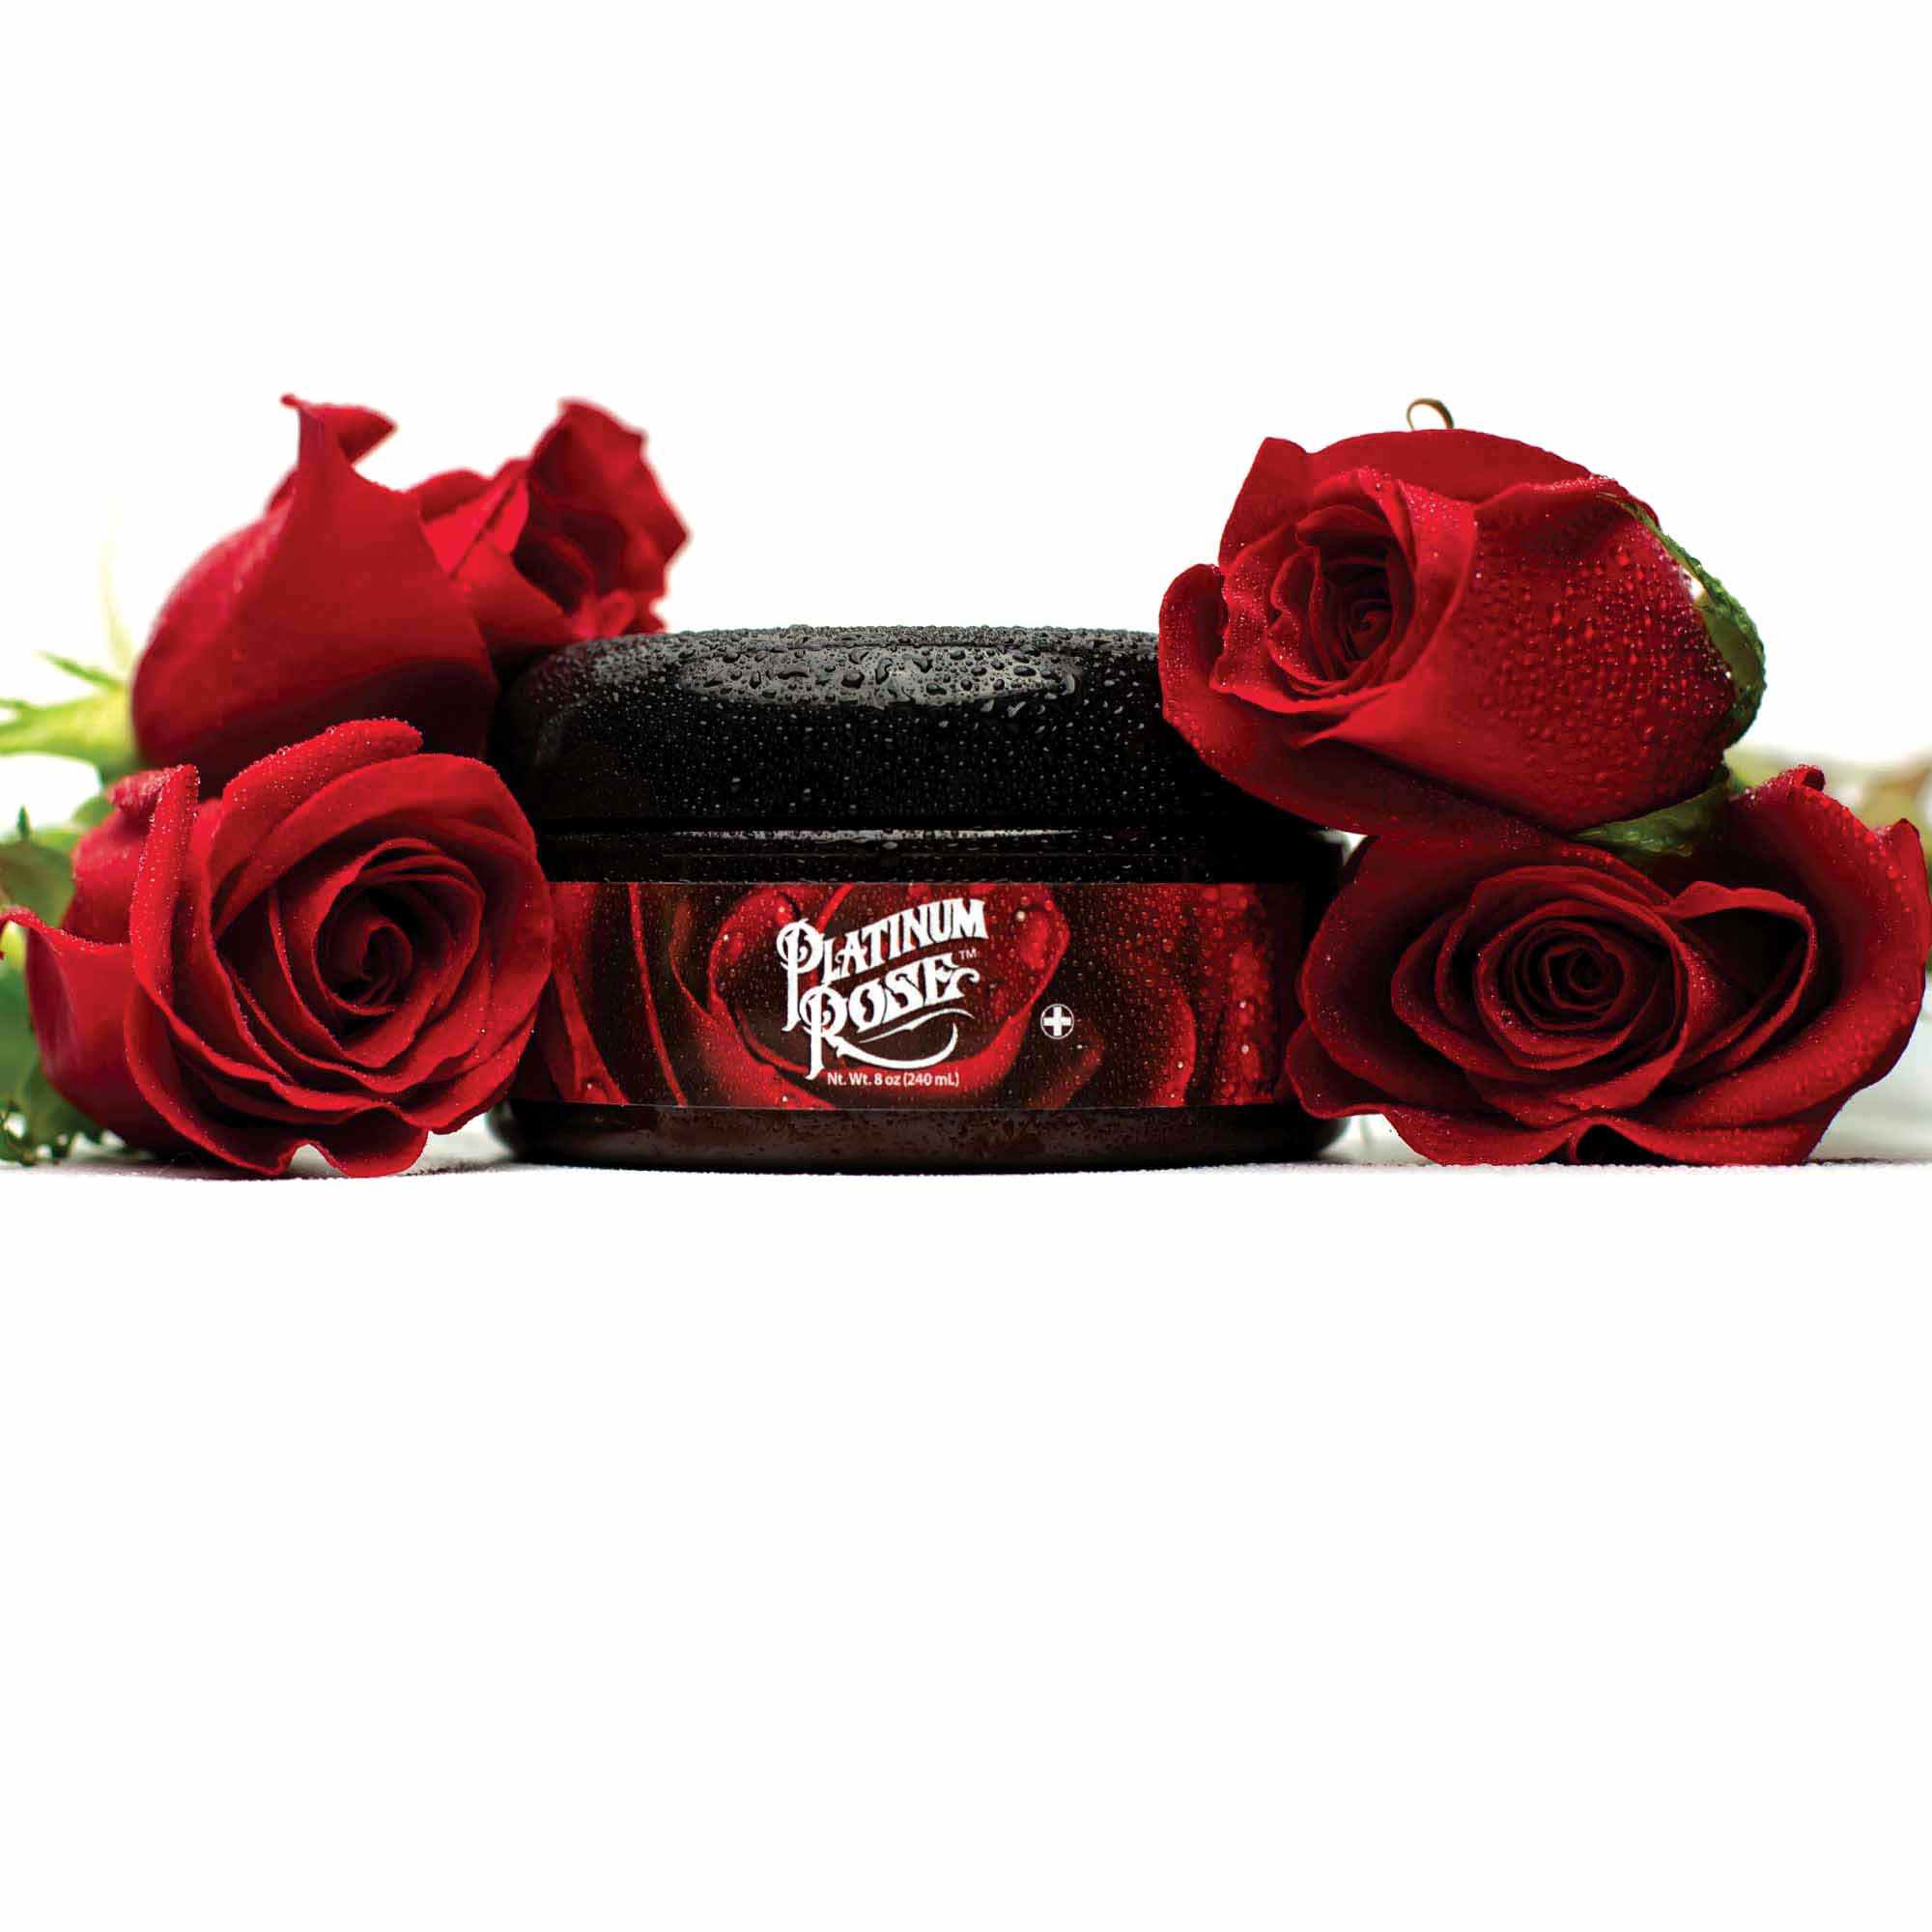 An 8oz Jar of rose scented Platinum Rose Tattoo Aftercare surrounded by freshly cut red roses